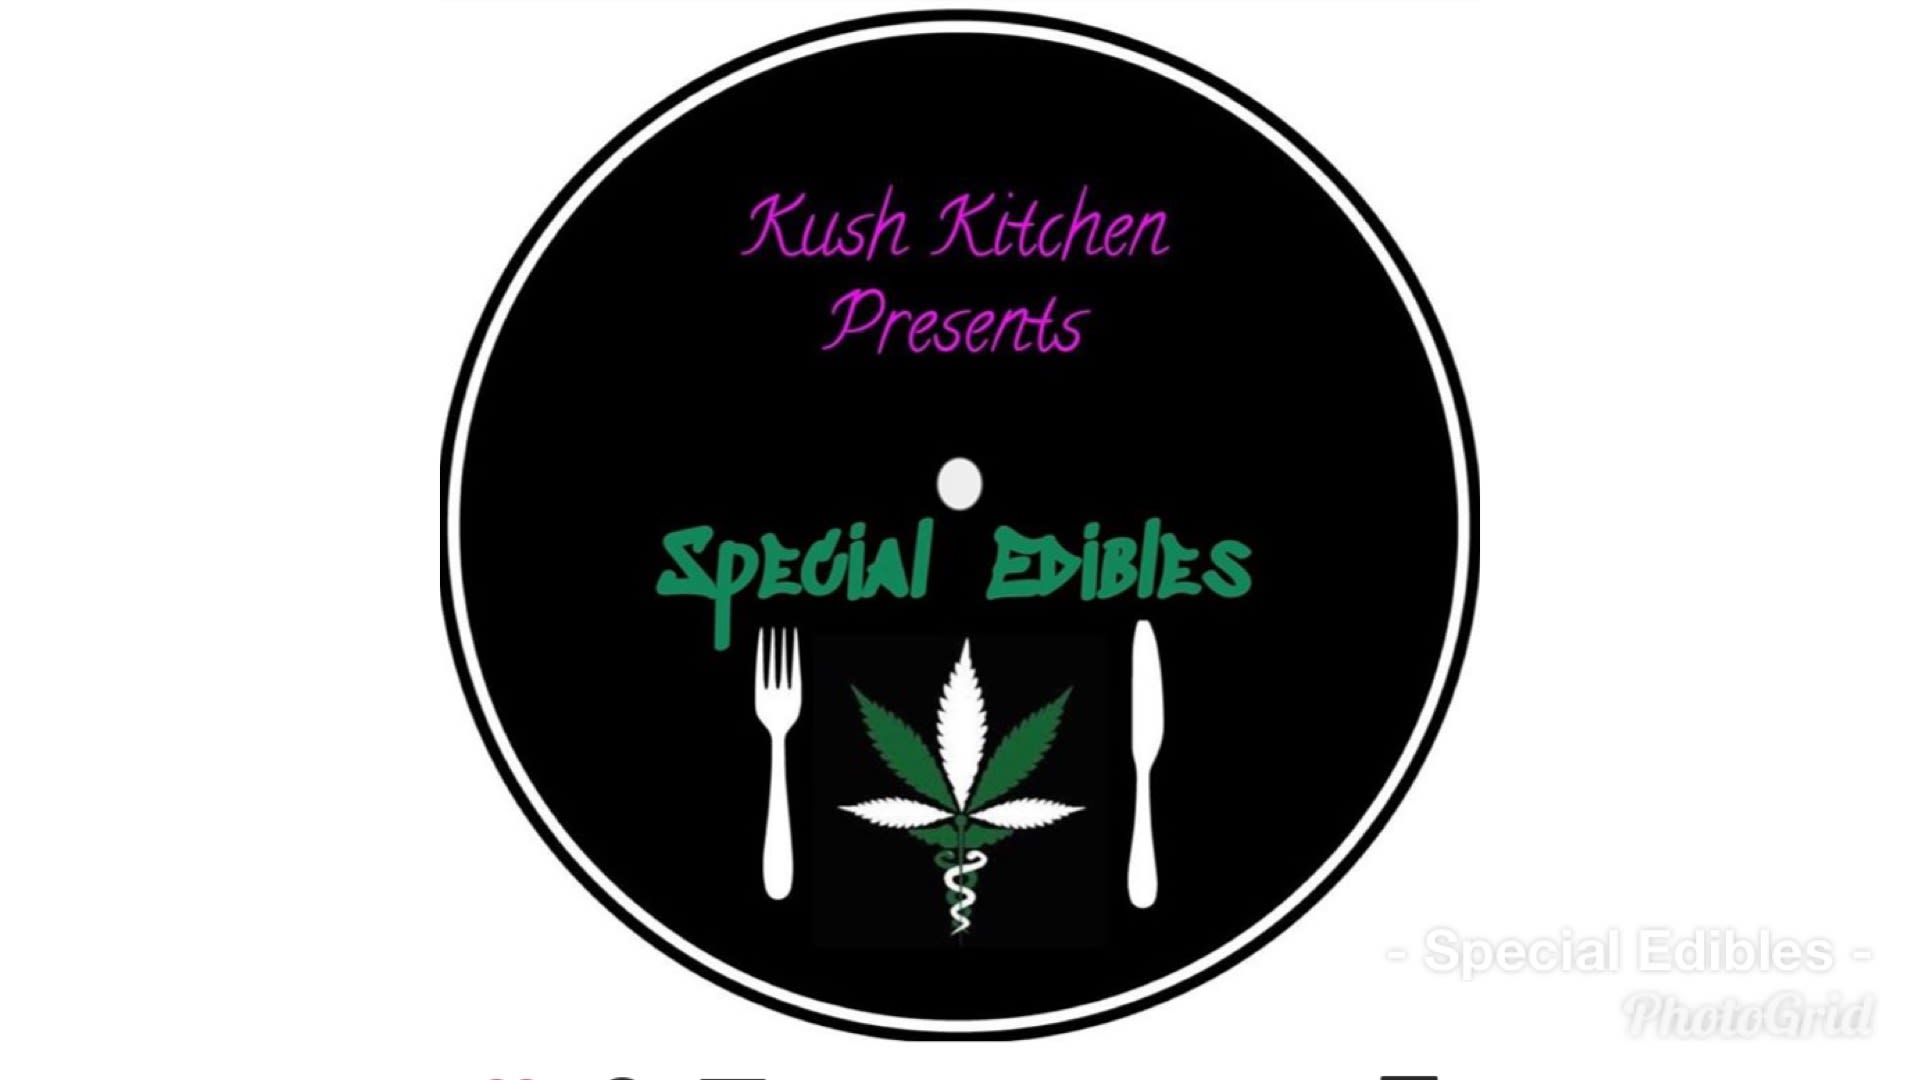 Kush Kitchen’s Special Edibles